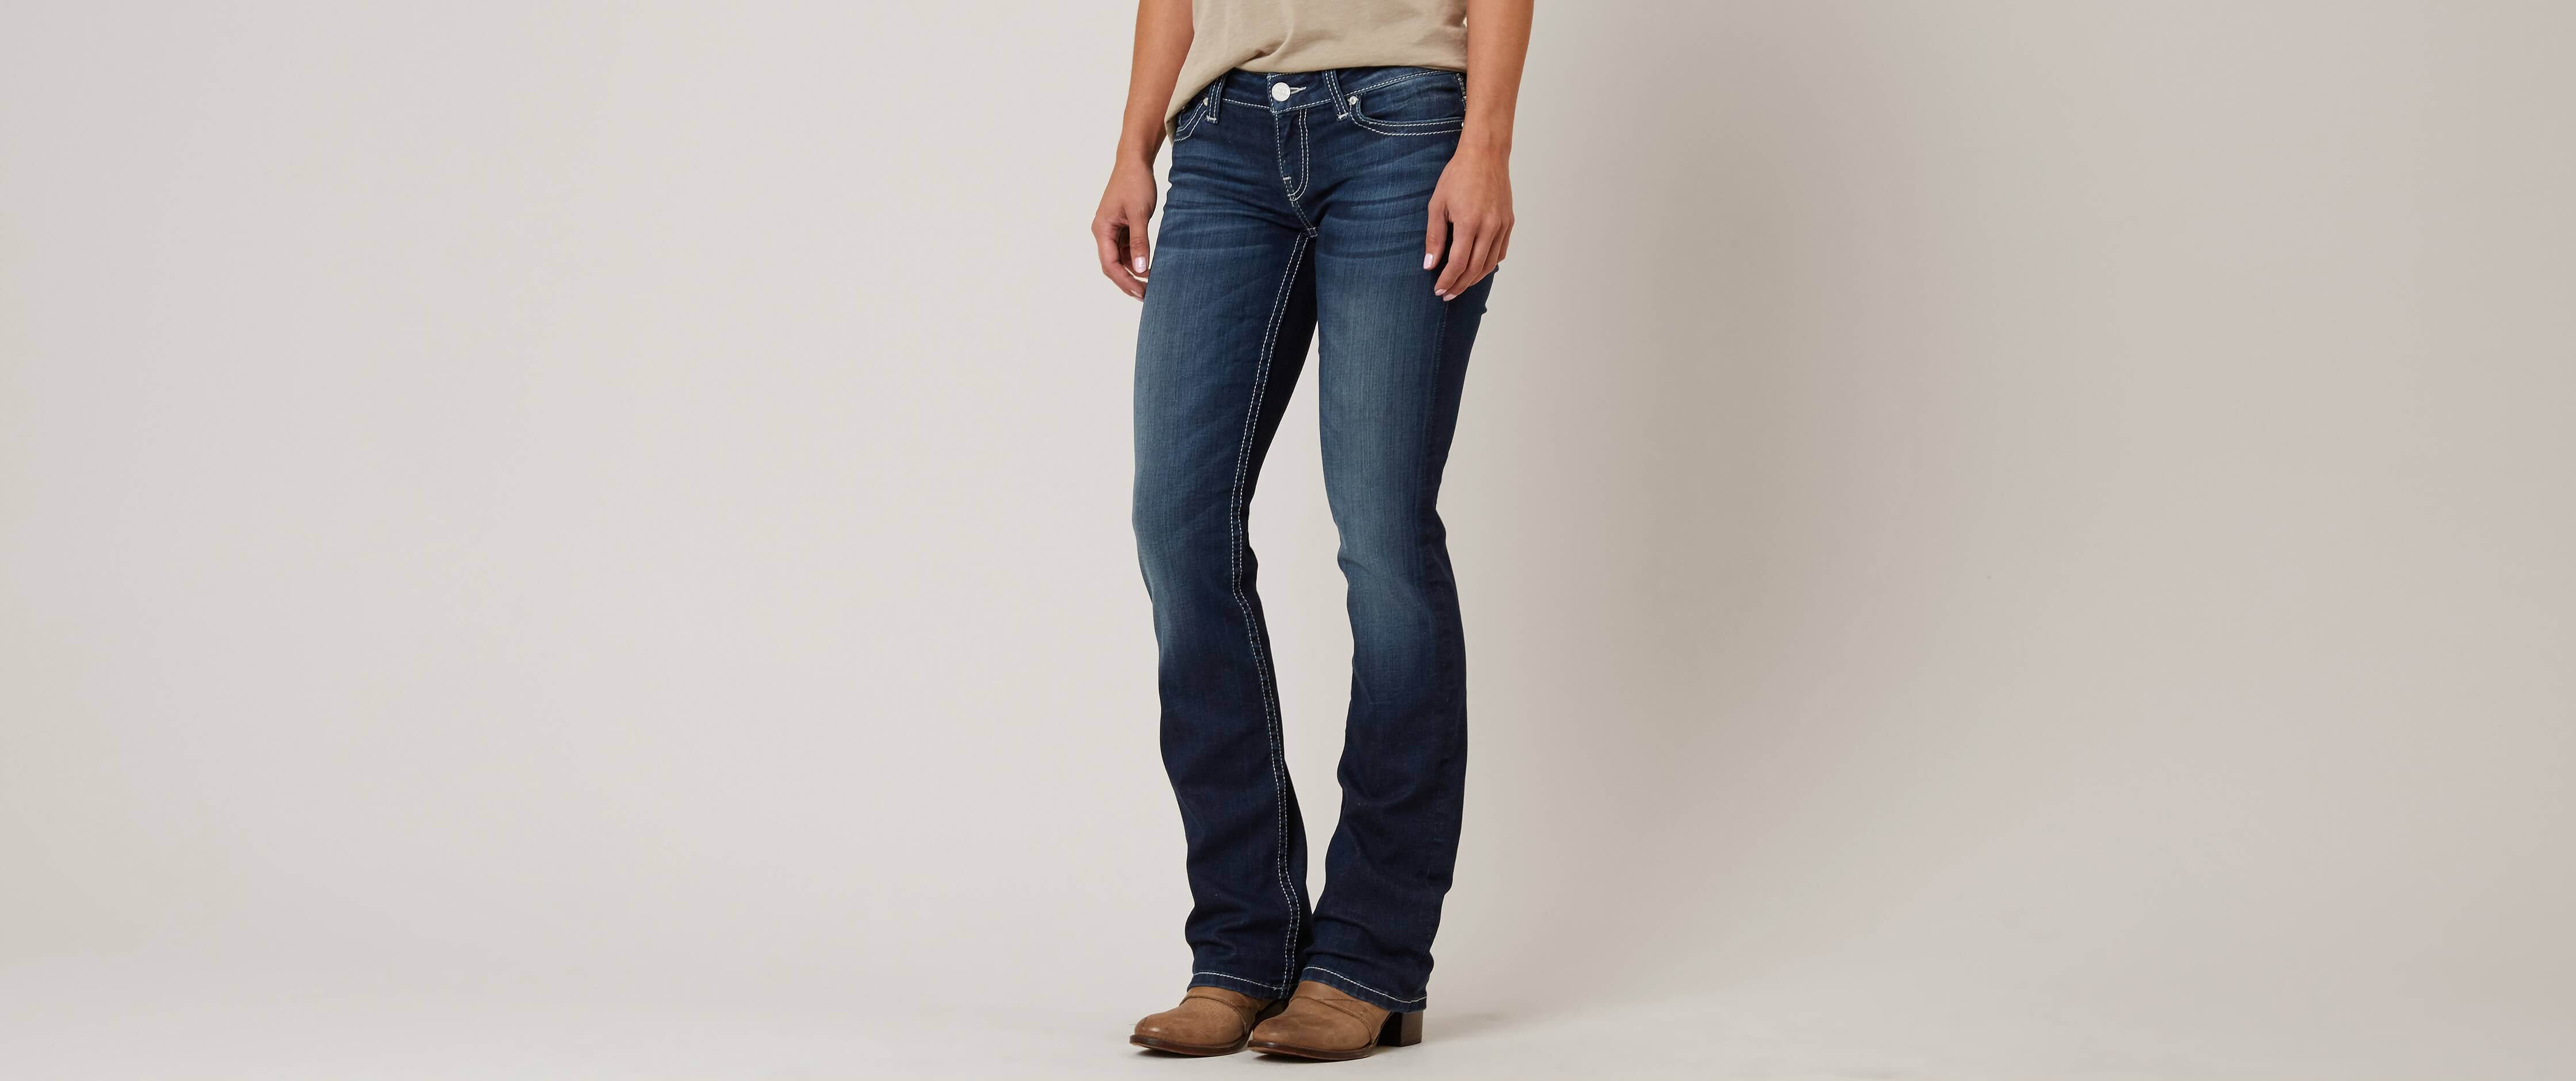 buckle bootcut jeans womens